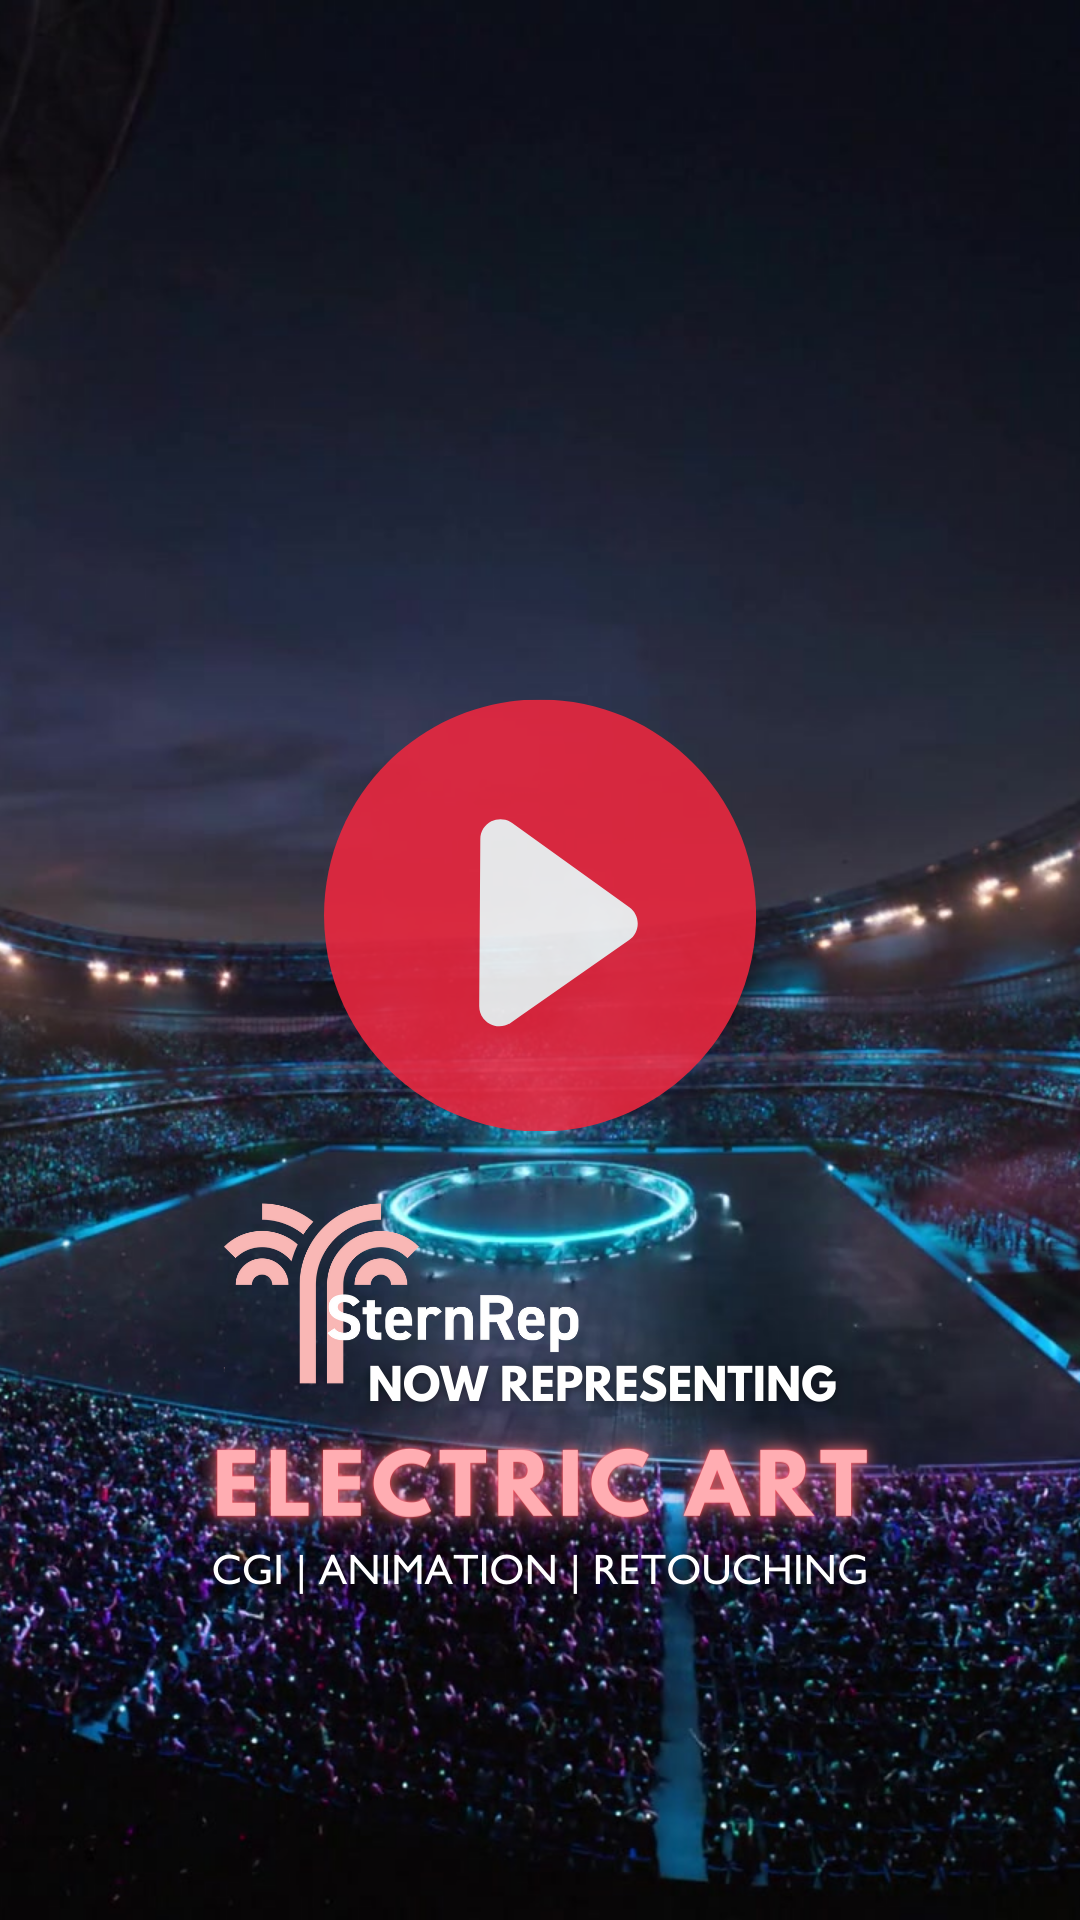 a screenshot of the Instagram Reel announcing that SternRep is now representing the CGI Artist team Electric Art